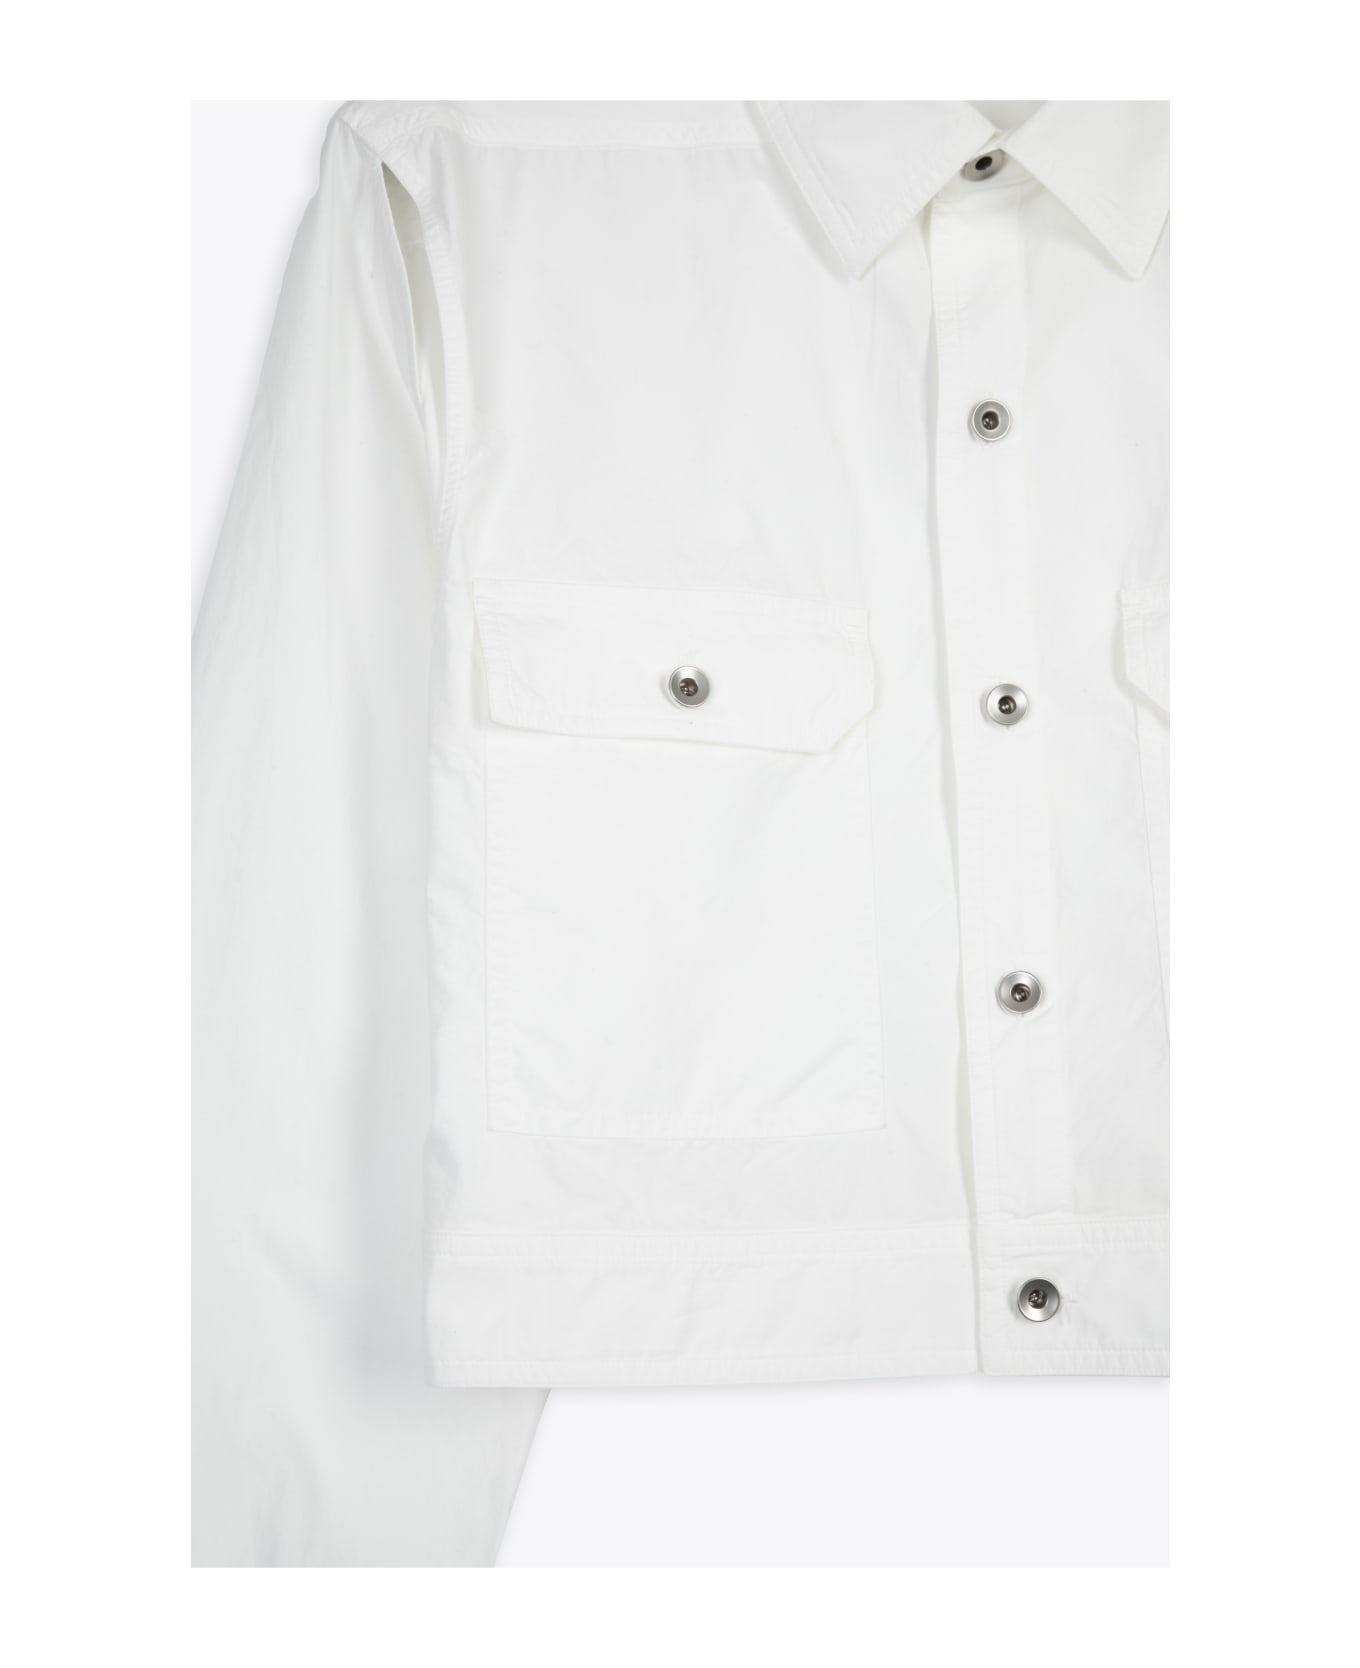 DRKSHDW Cape Sleeve Cropped Outershirt White poplin cotton outershirt - Cape sleeve cropped outershirt - Latte